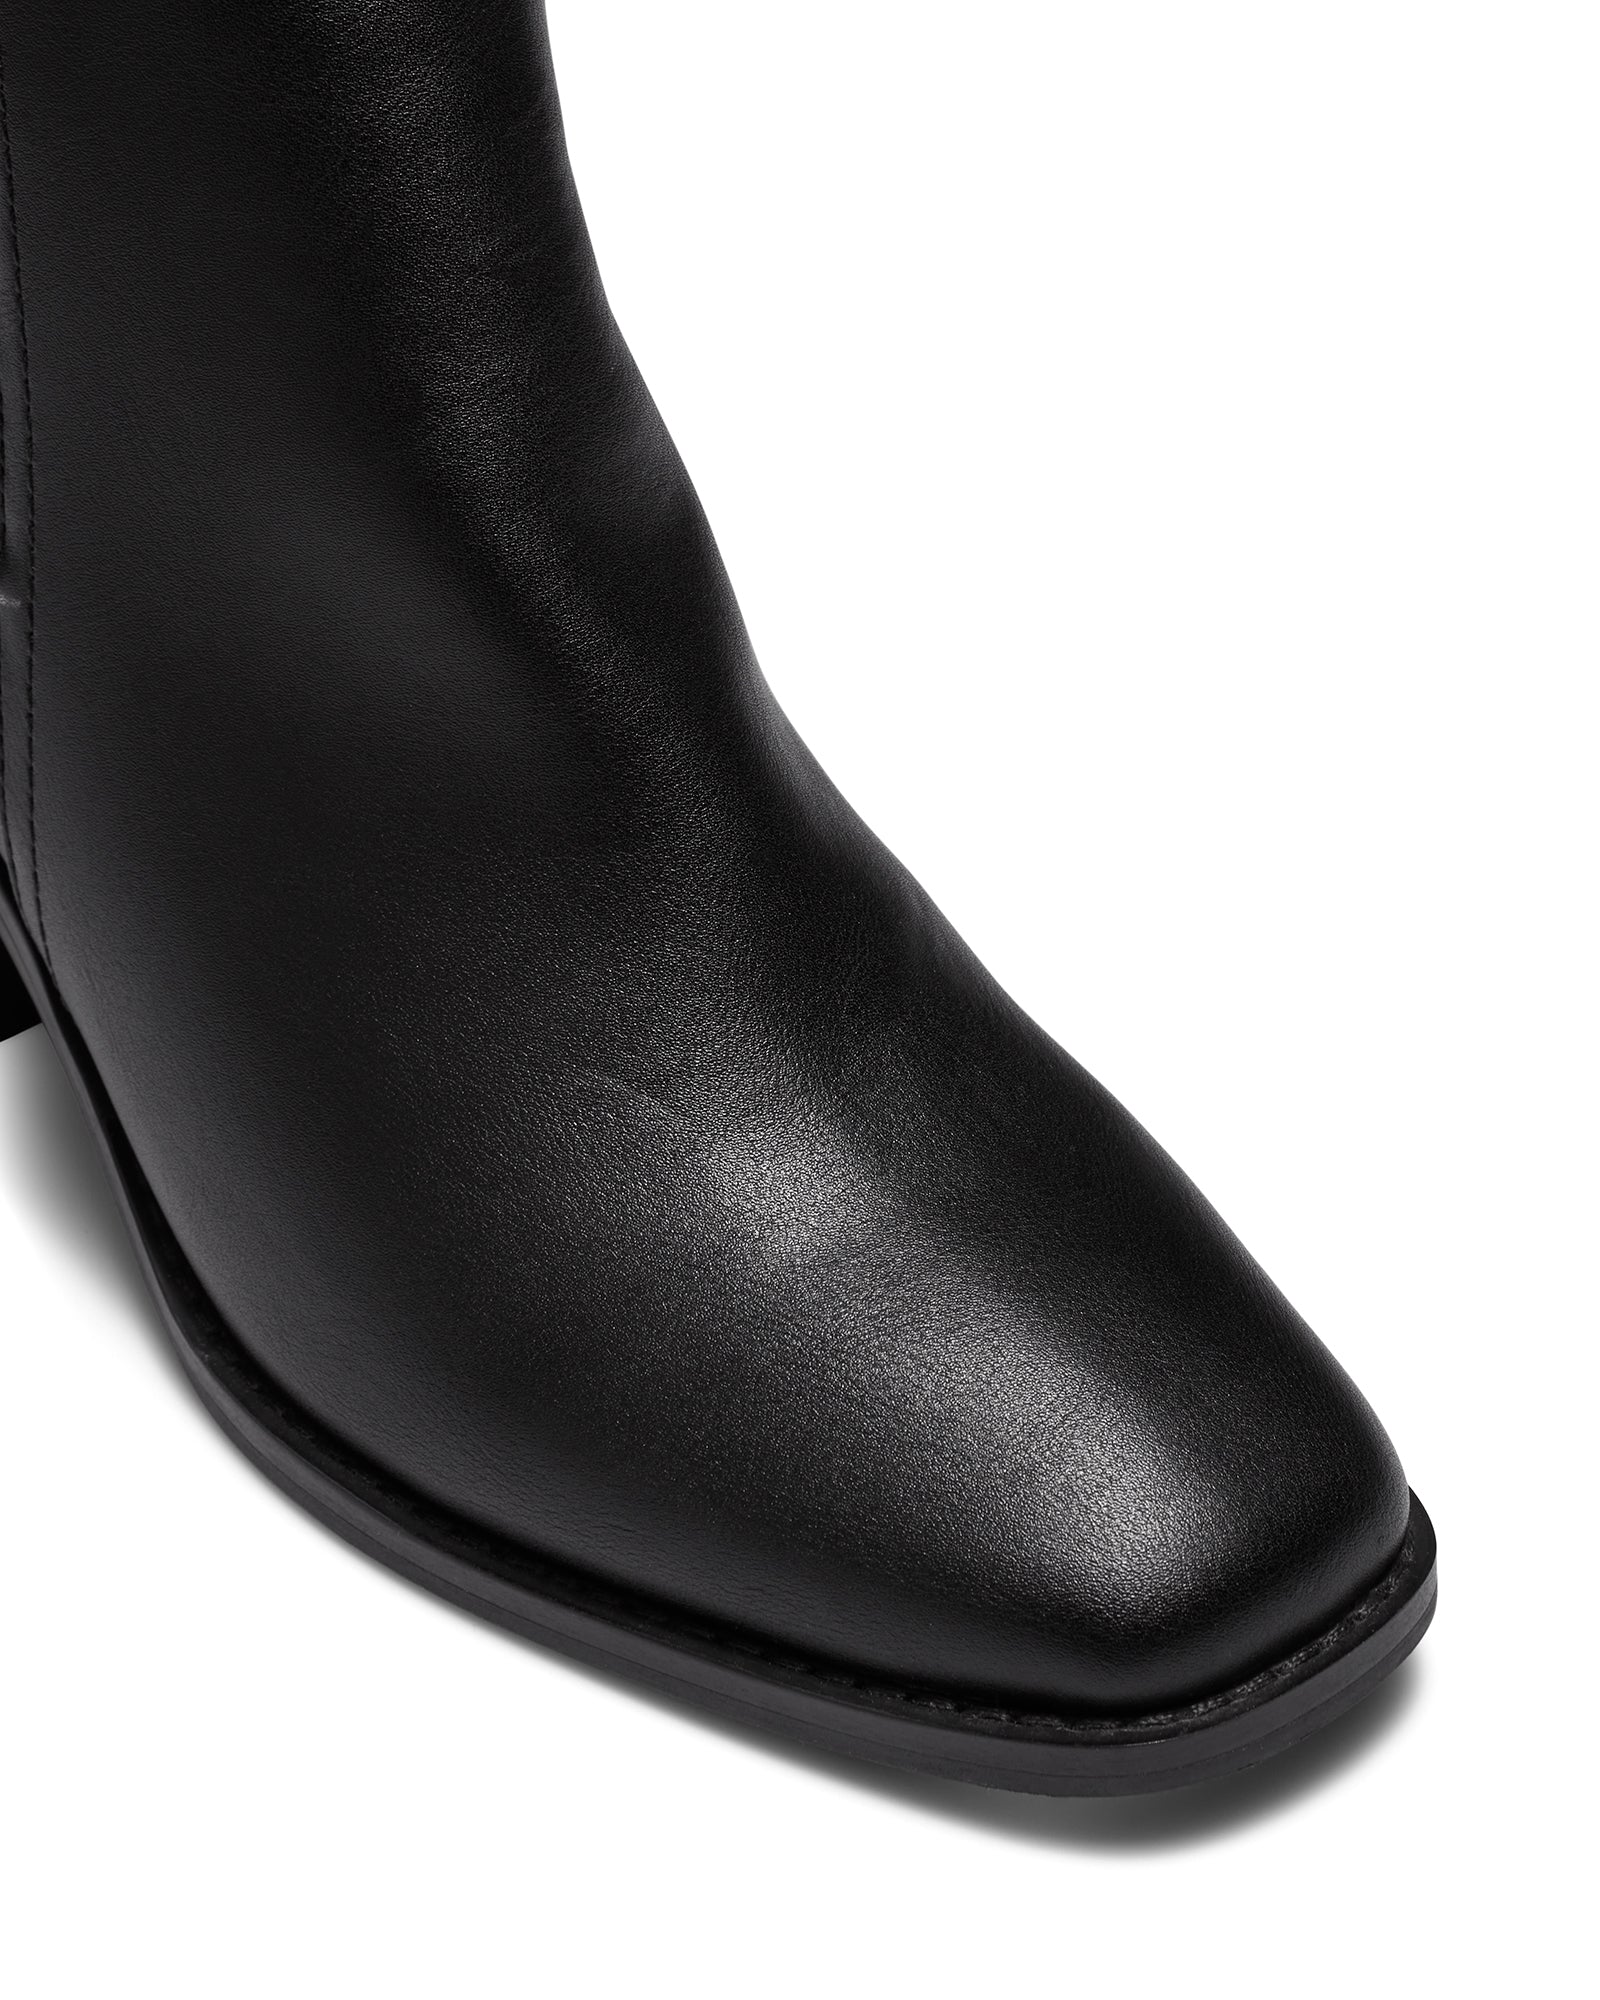 Therapy Shoes Ophelia Black | Women's Boots | Ankle | Block Heel | Casual